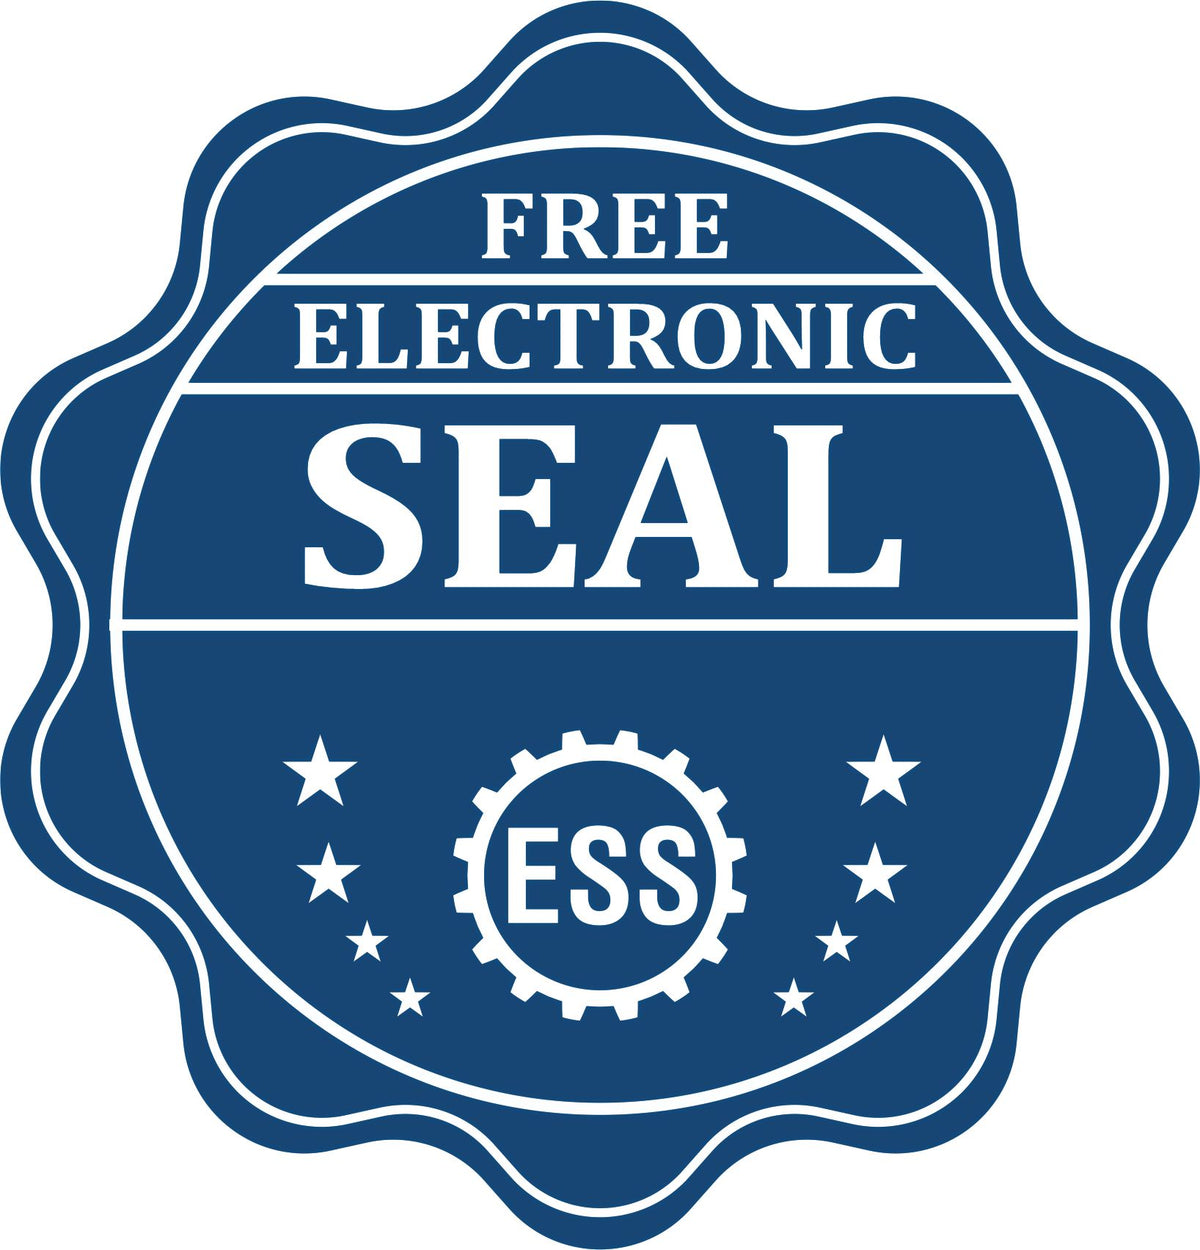 A badge showing a free electronic seal for the Heavy Duty Cast Iron Colorado Geologist Seal Embosser with stars and the ESS gear on the emblem.